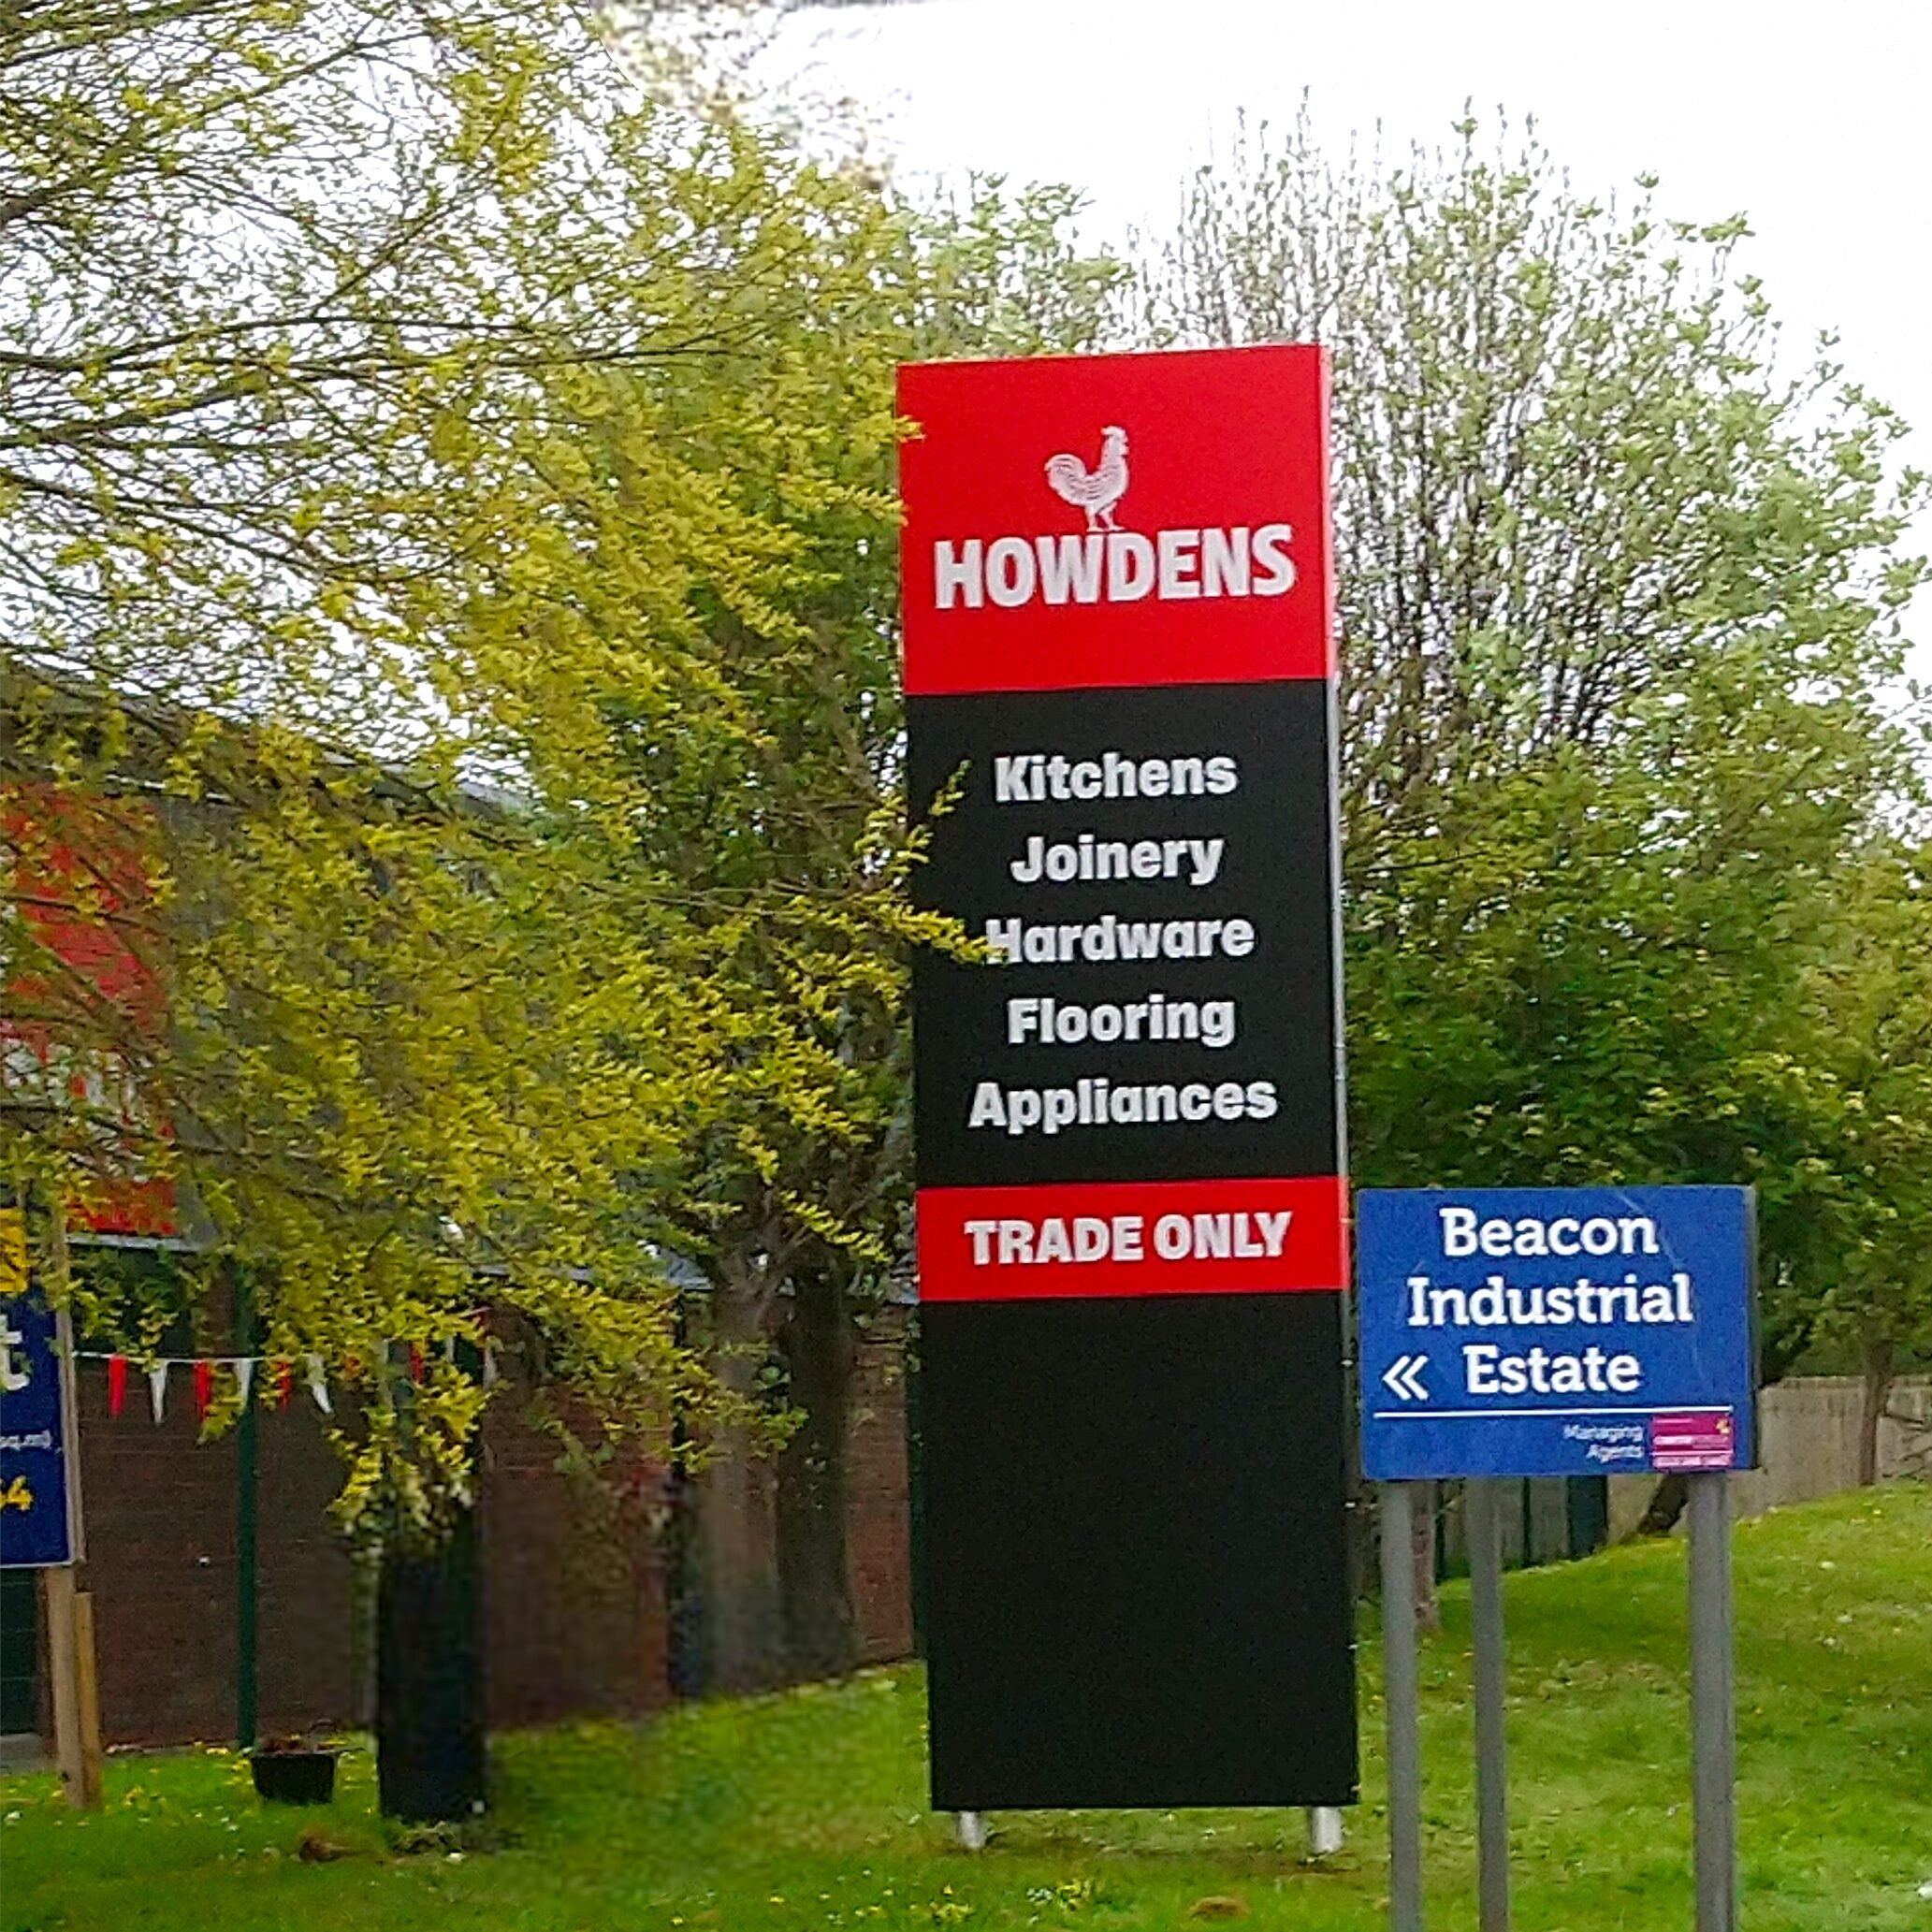 Image of the Howdens sign designed, developed and printed by PPL Group